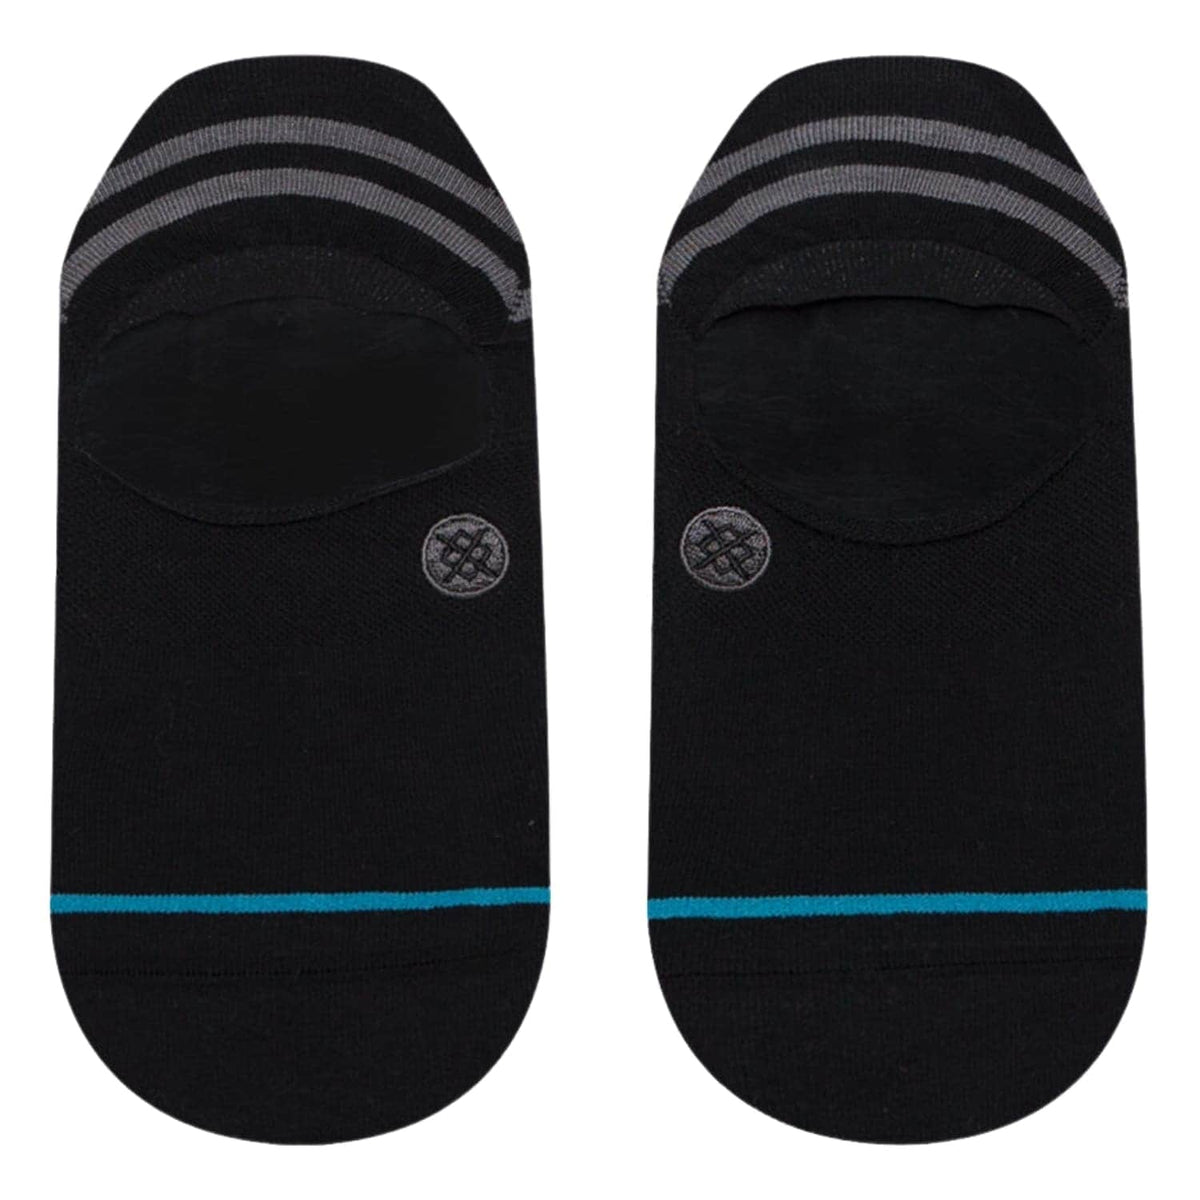 Stance Gamut 2 Invisible Socks - Black - Mens Invisible/No Show Socks by Stance